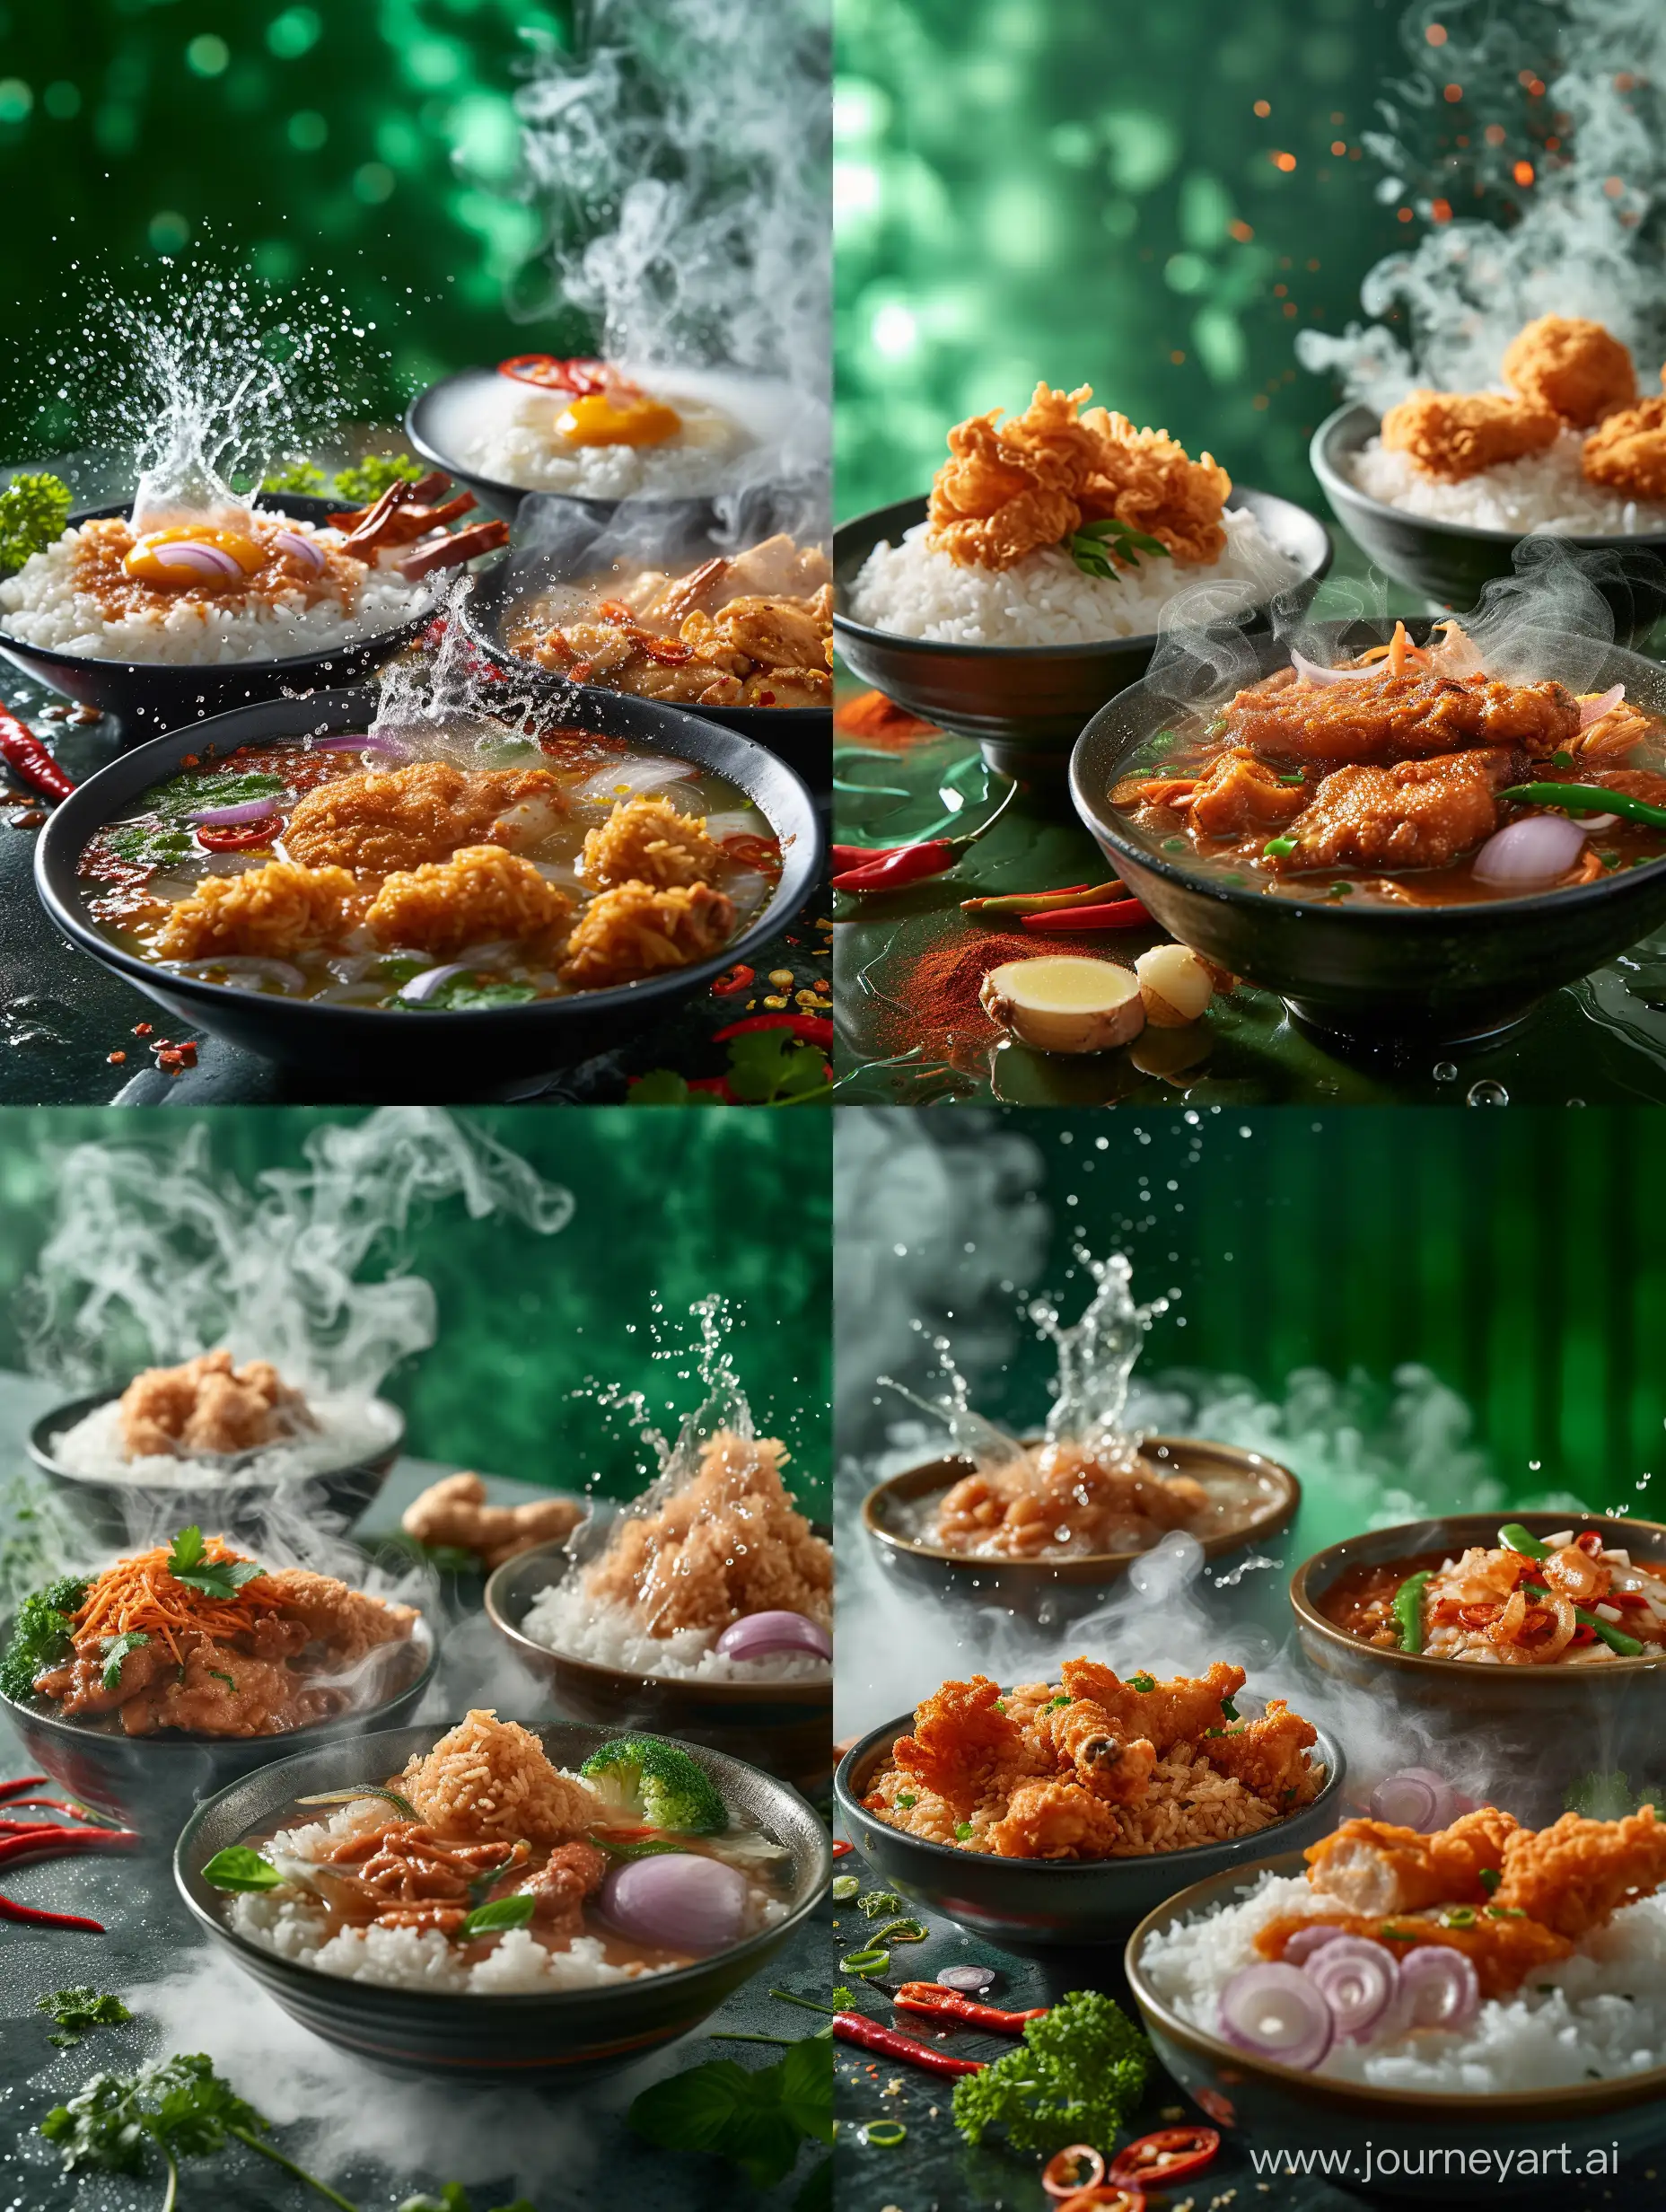 ultra realistic, Malay food dishes. rice and fried chicken. fish and rice goulash bowls. chili, onion and ginger. there is a little smoke and splashing water. there is a green light behind. canon eos-id x mark iii dslr --v 6.0